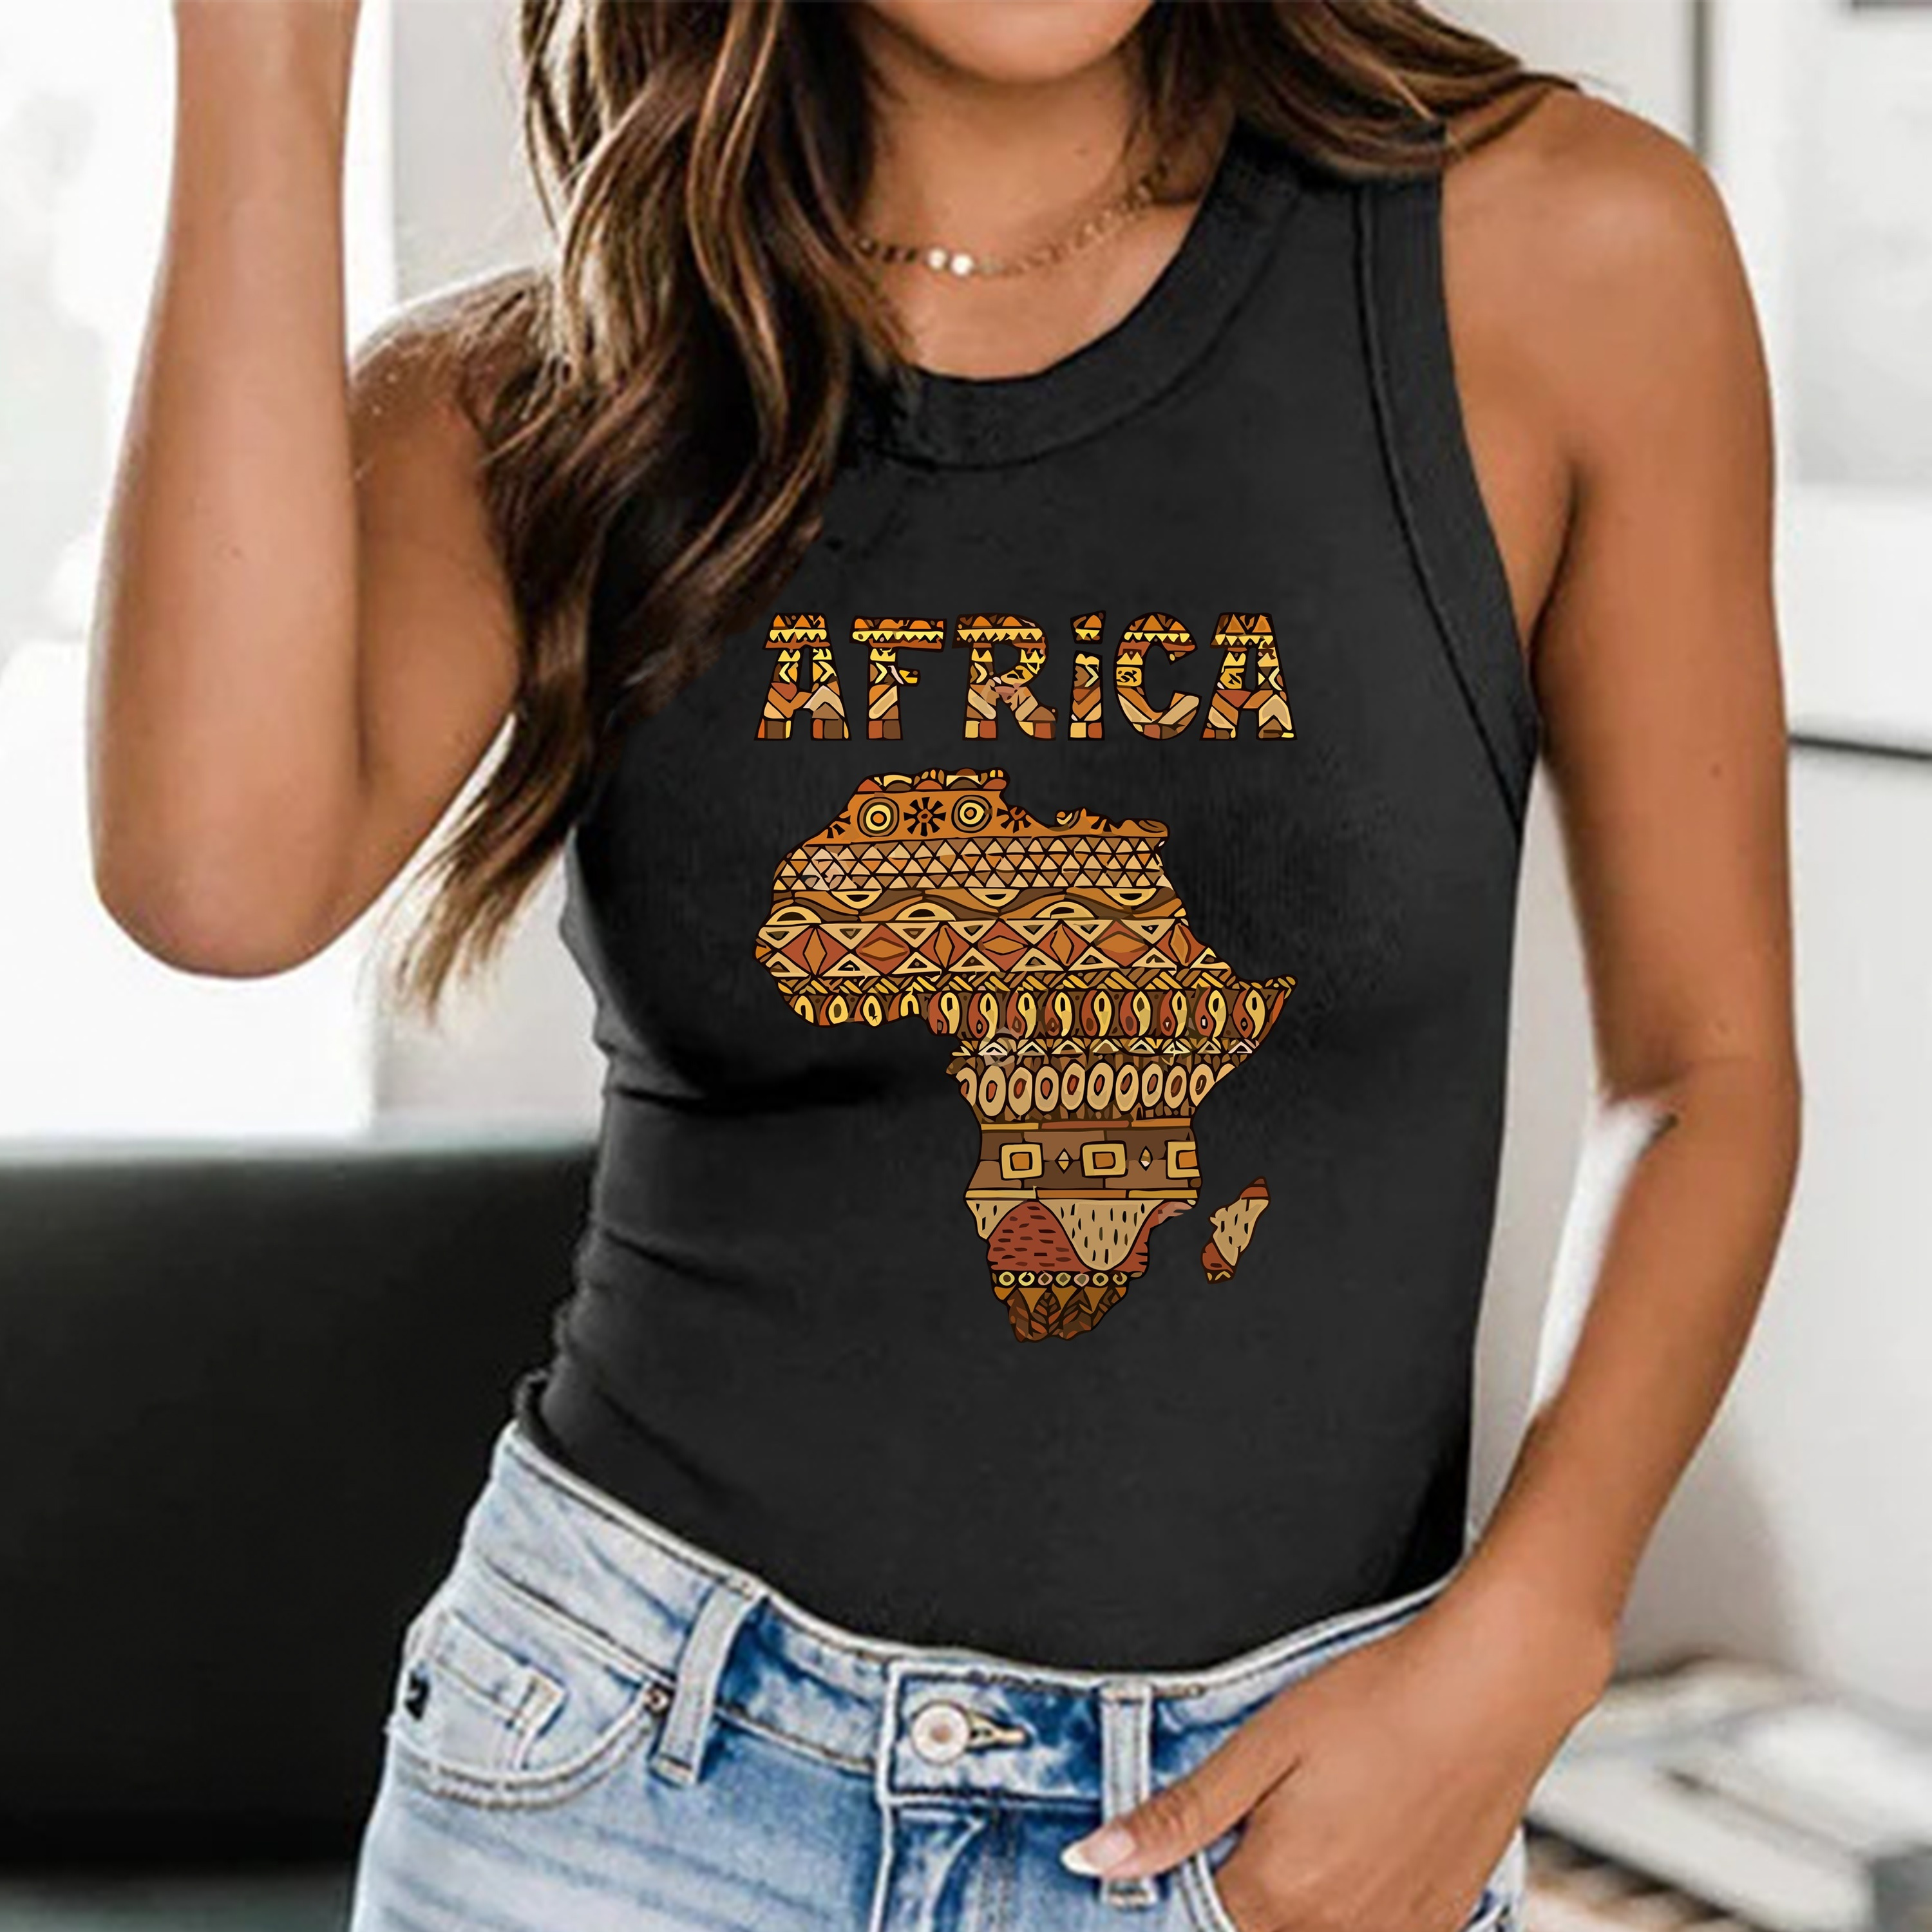 

Africa Print Crew Neck Tank Top, Casual Sleeveless Top For Summer & Spring, Women's Clothing